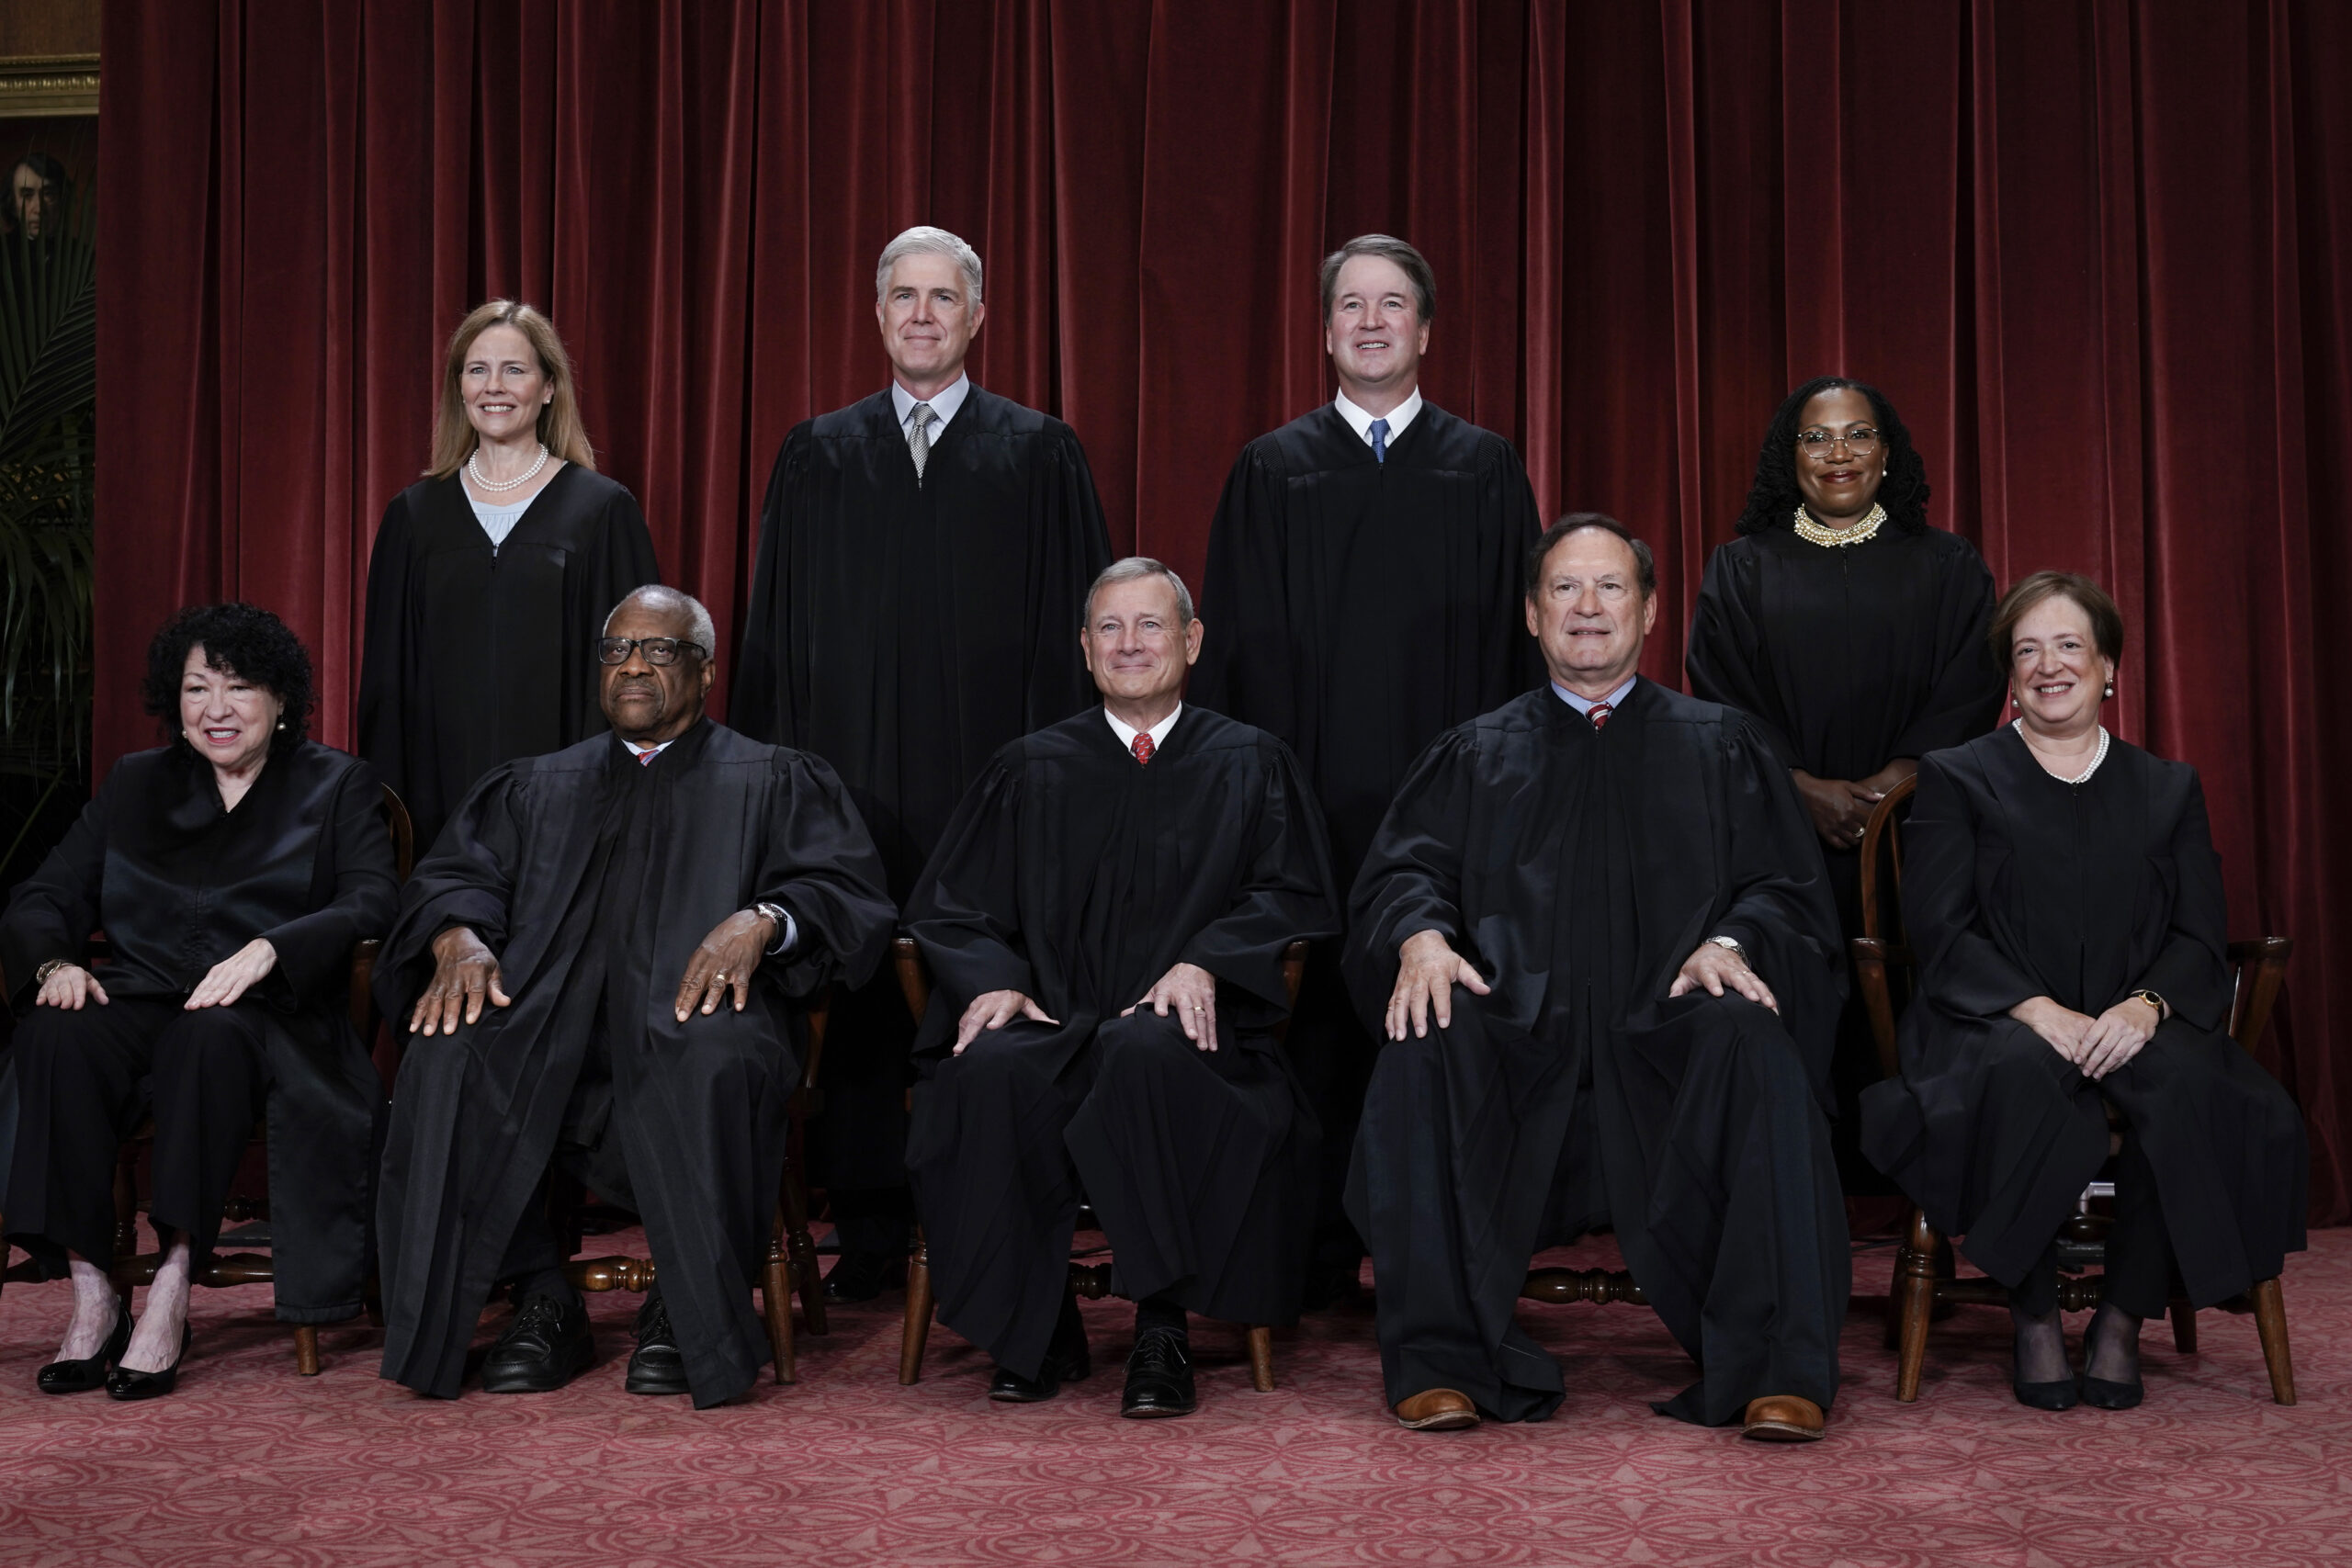 NEW POLL: Majority of Americans Back Supreme Court’s Decision in Affirmative Action Case